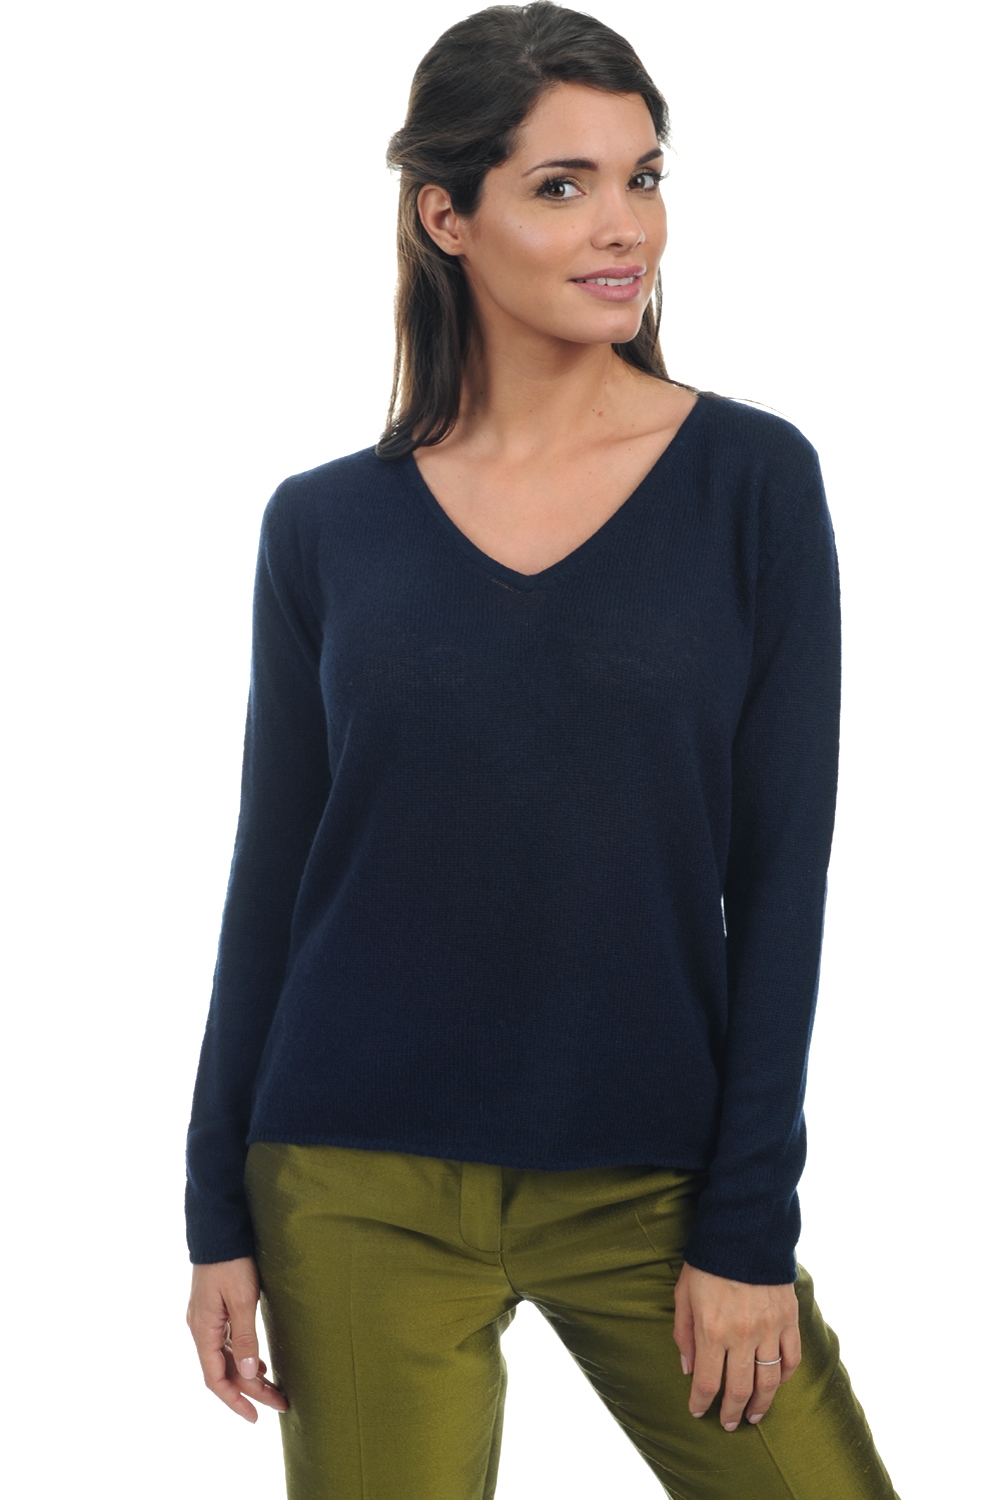 Cashmere ladies basic sweaters at low prices flavie dress blue s